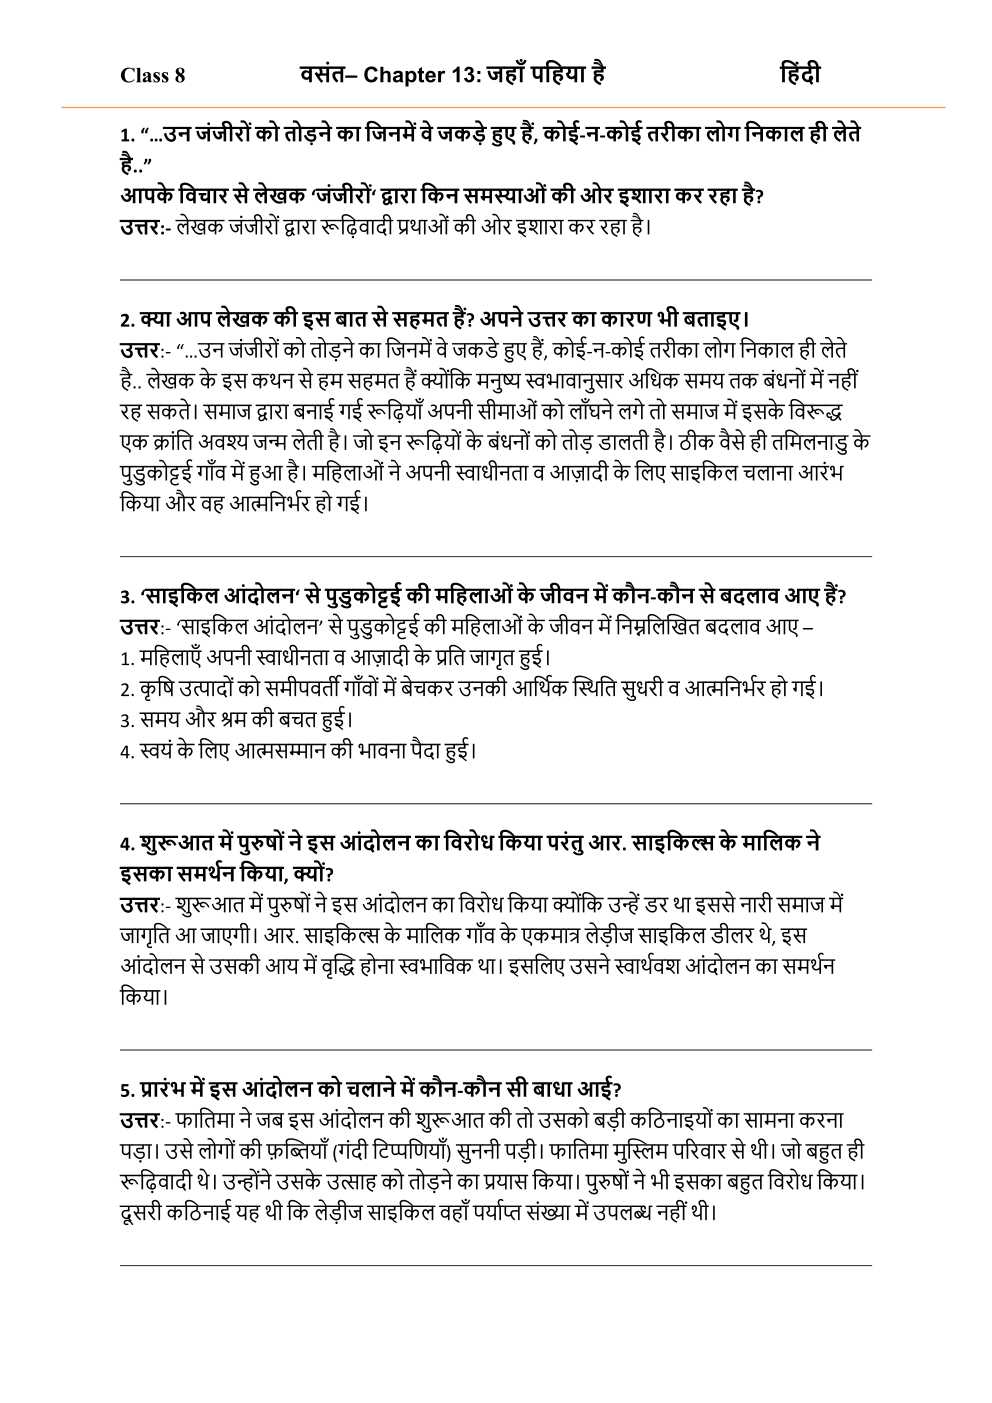 NCERT Solutions For Class 8 Hindi Vasant Chapter 13